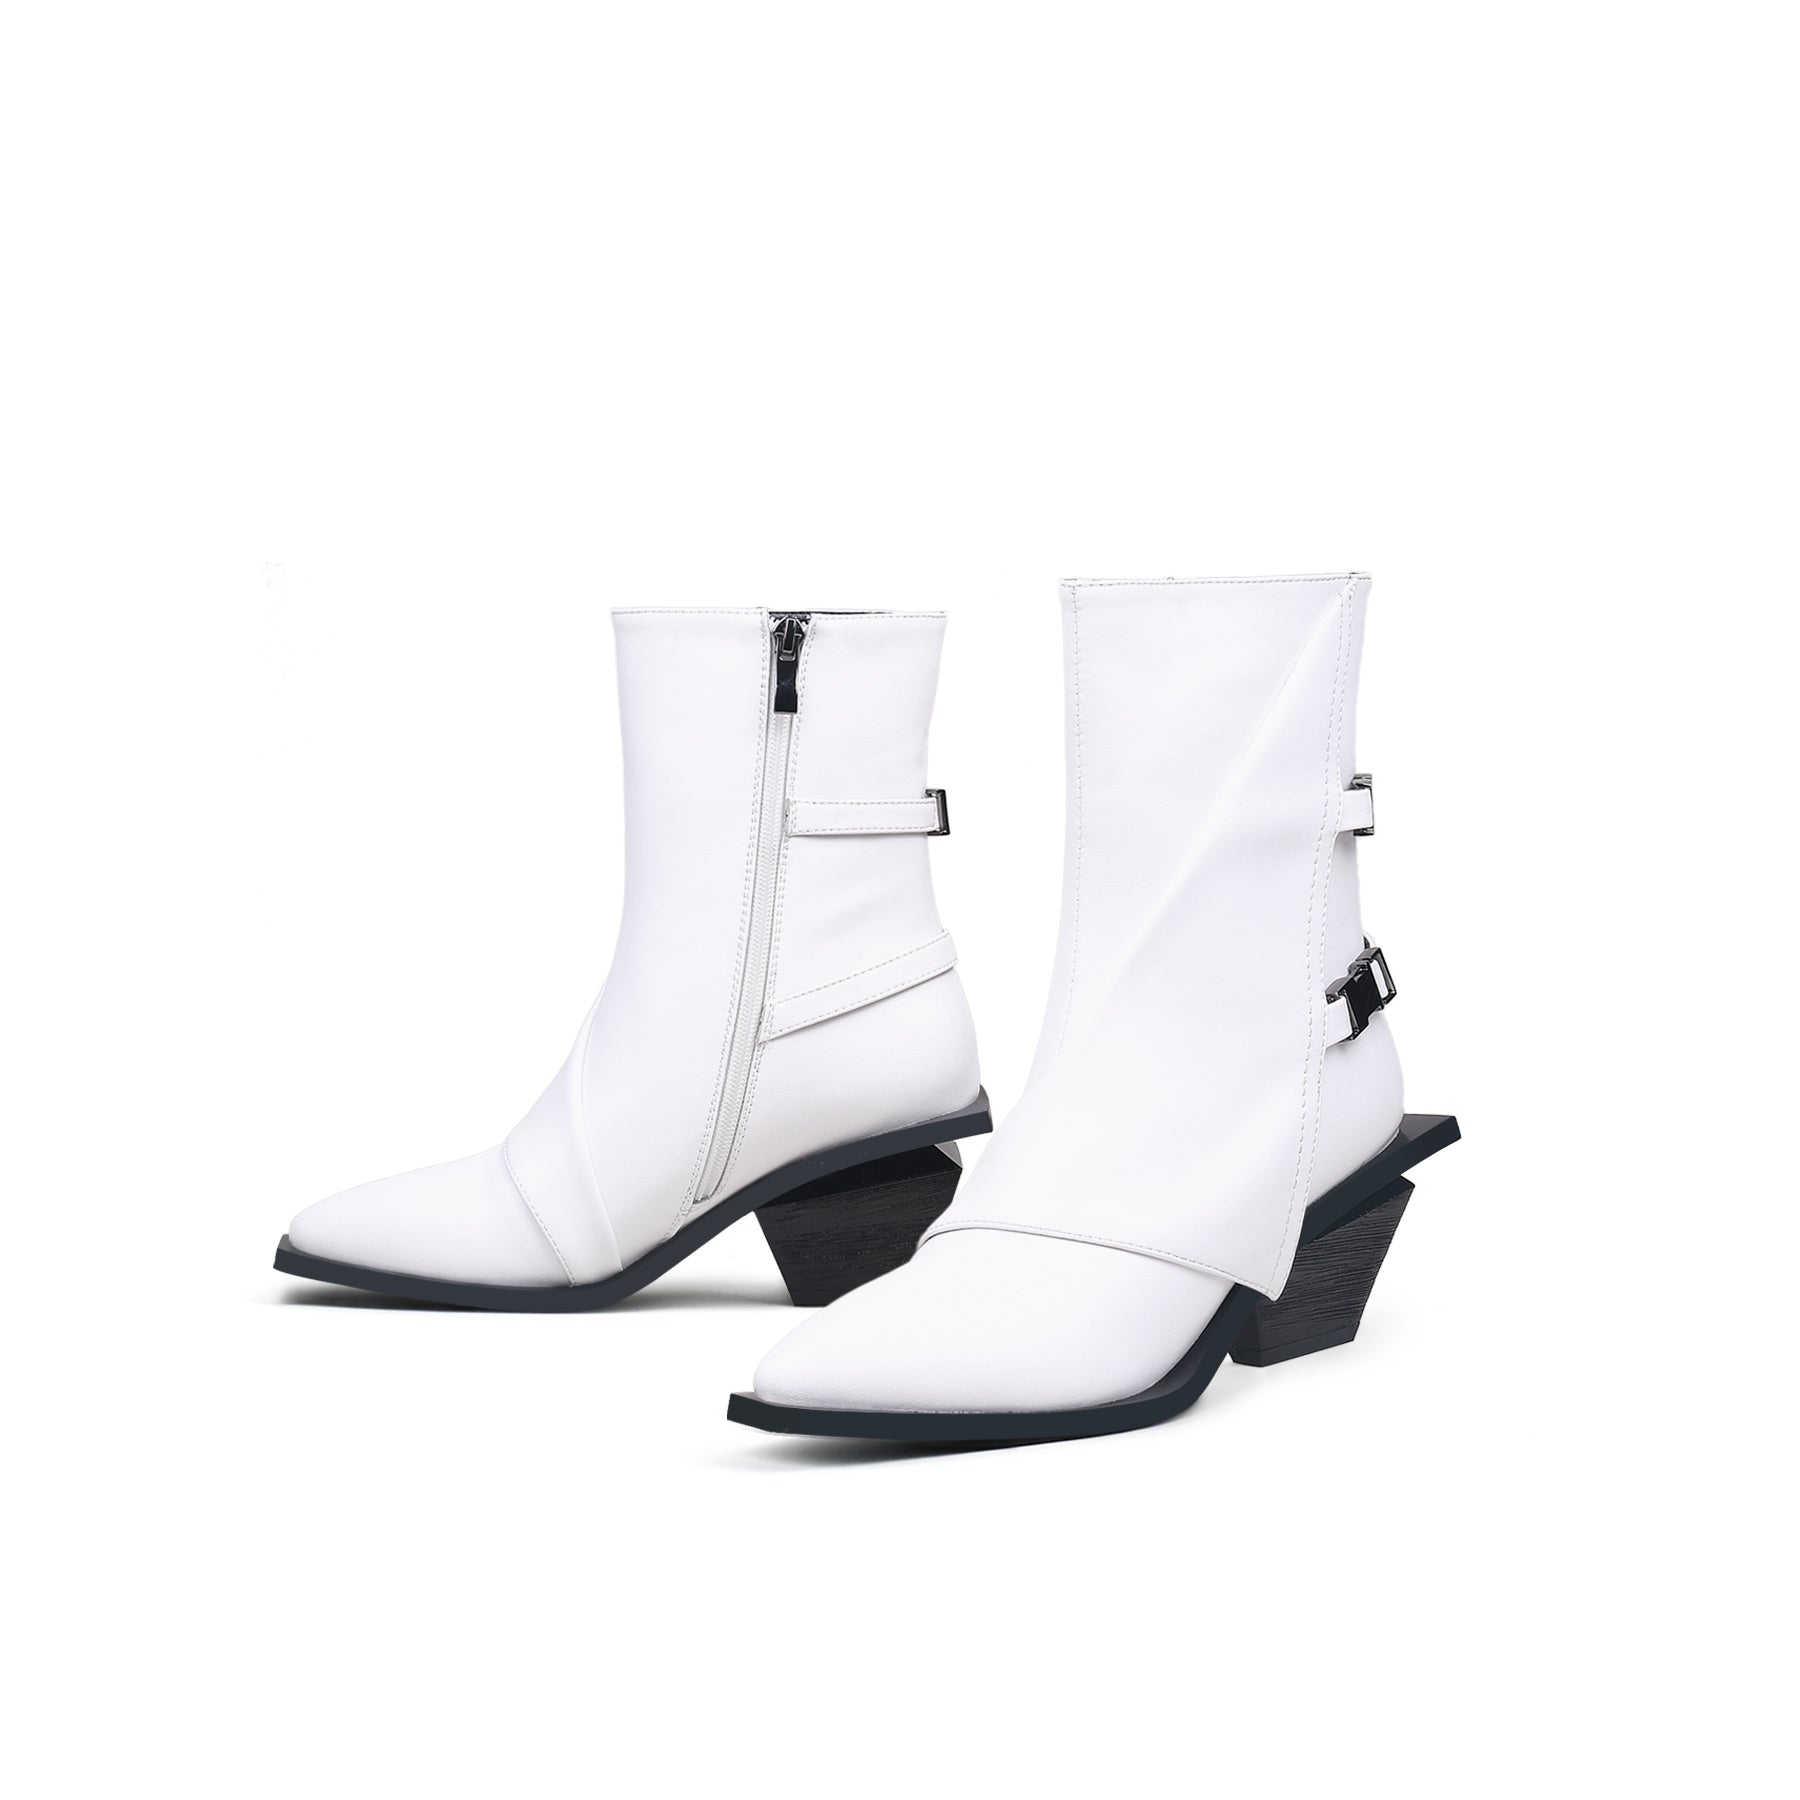 Next Page Belted White Boots - 0cm